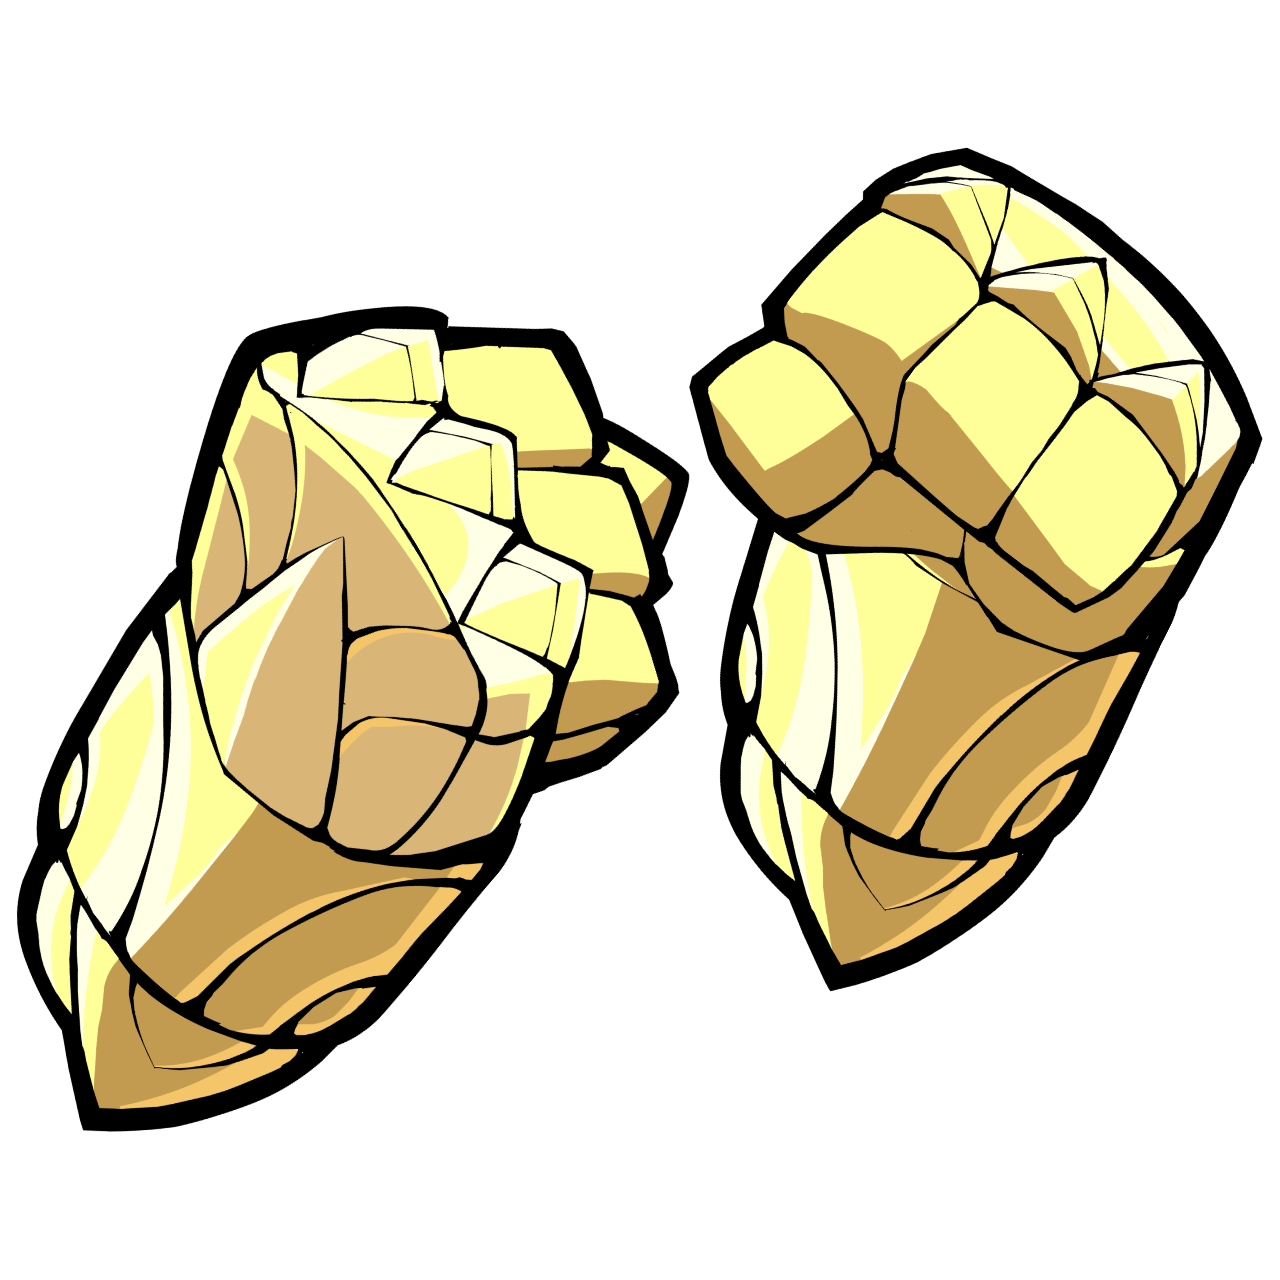 Goldforged Gauntlets is one of the Weapon Skins in the game Brawlhalla. 